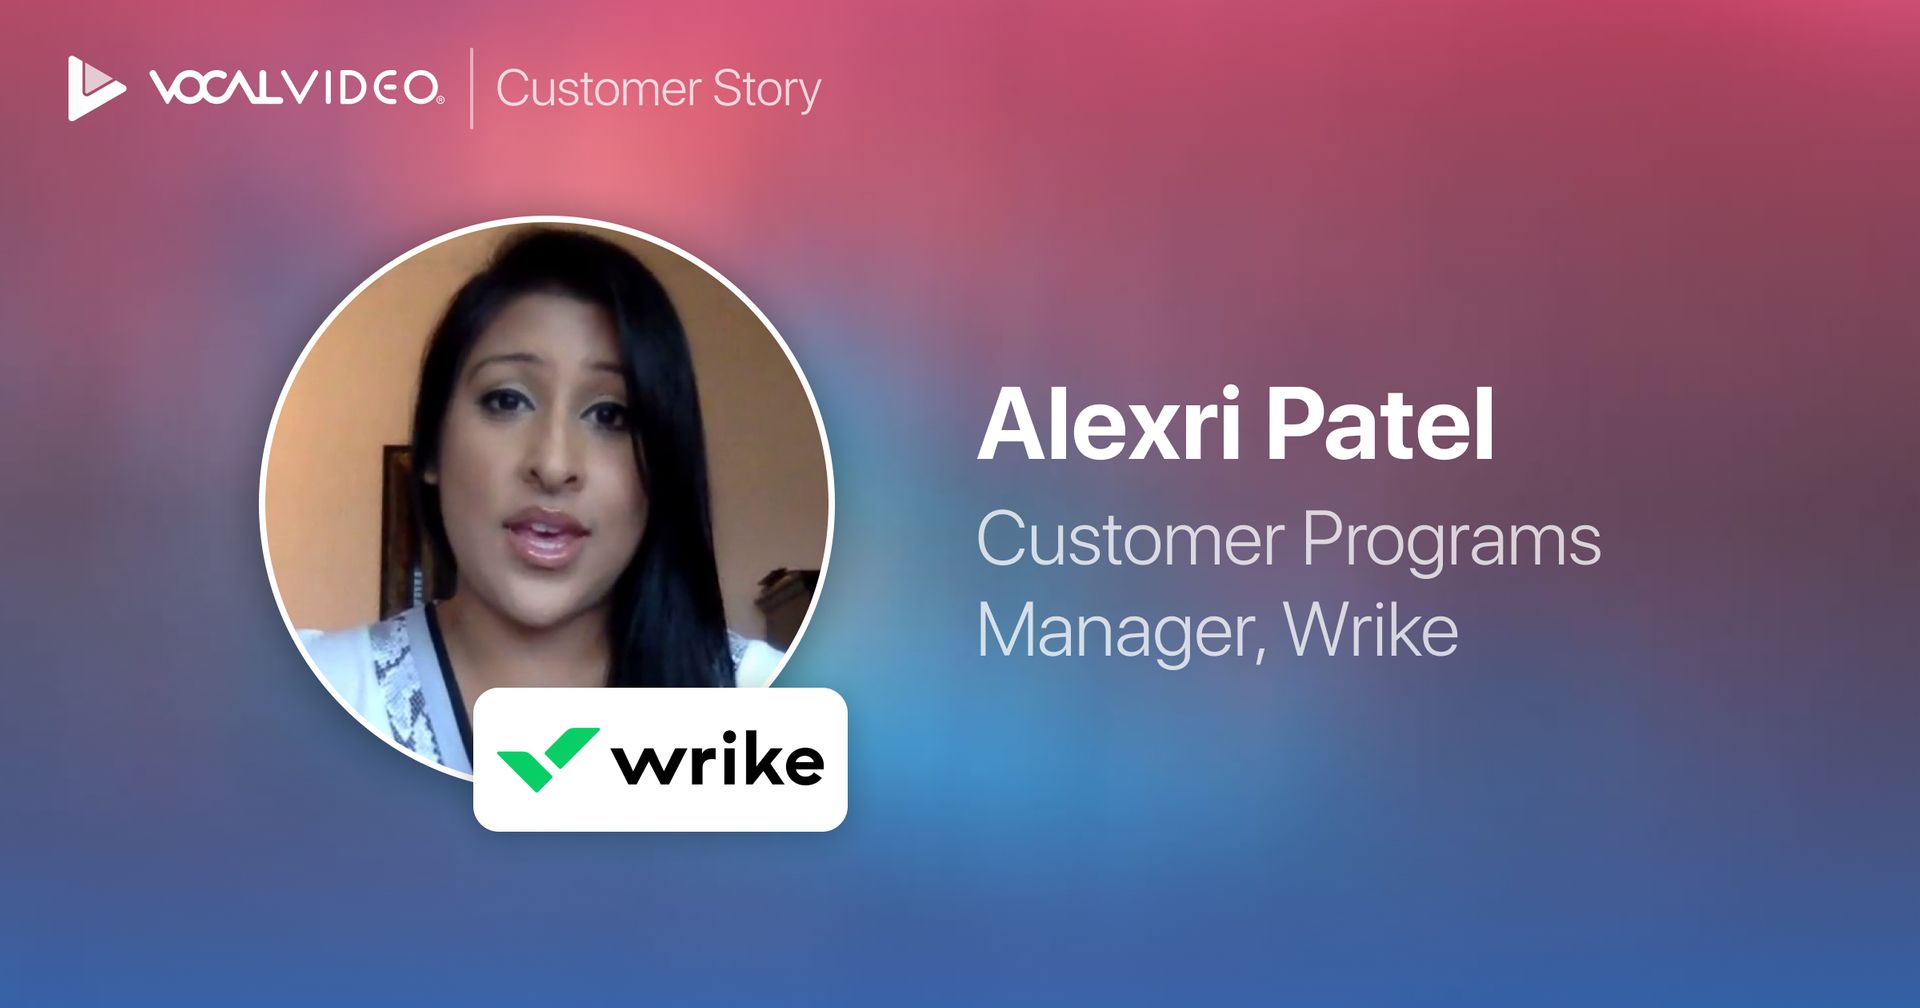 How Wrike Captures Customer Story Videos for a New Product